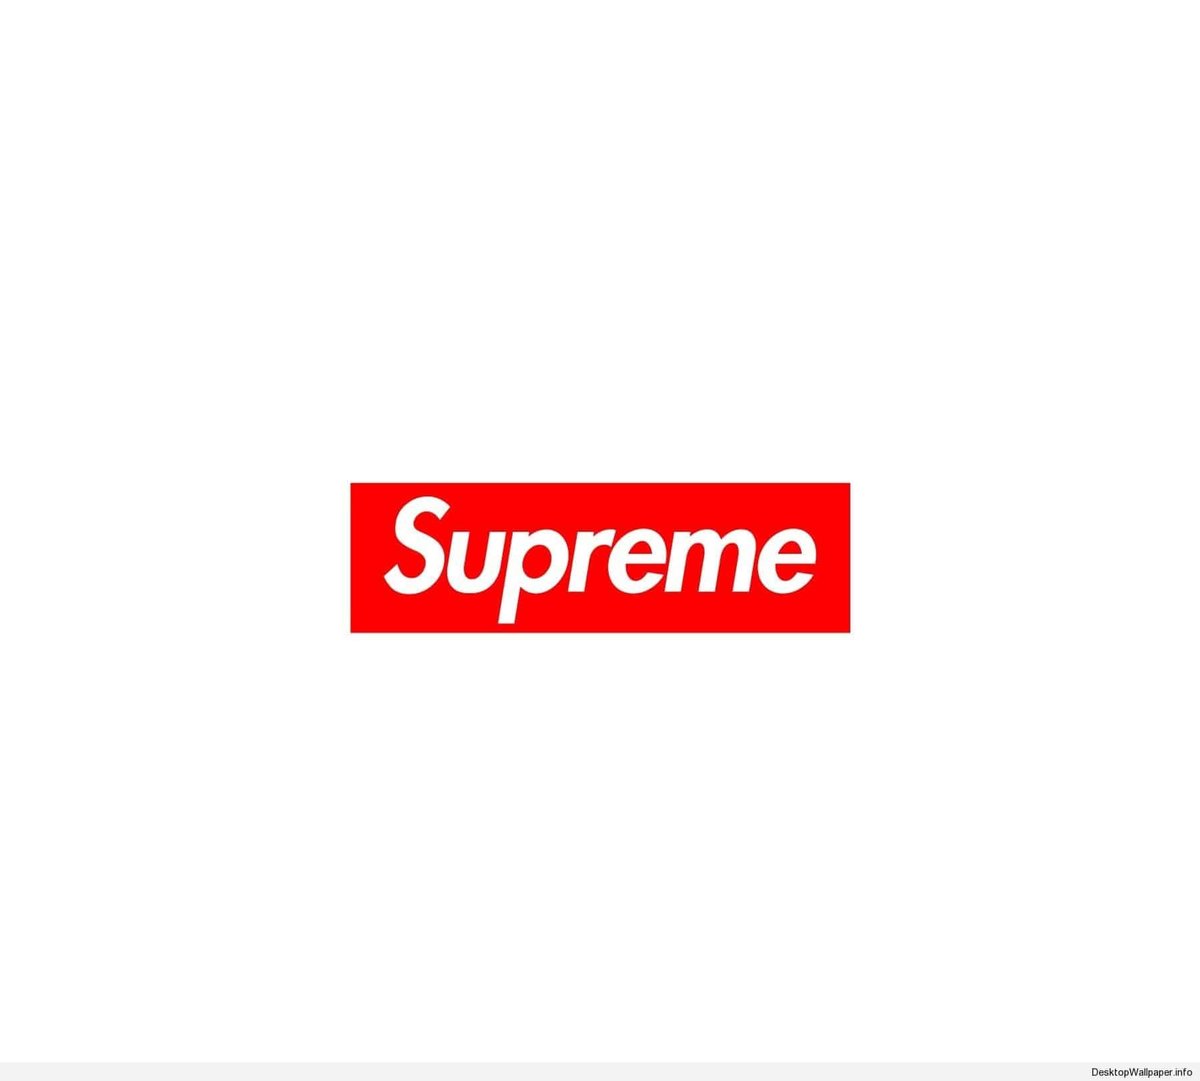 Supreme Has Been Acquired By VF Corporation For US$2.1 Billion